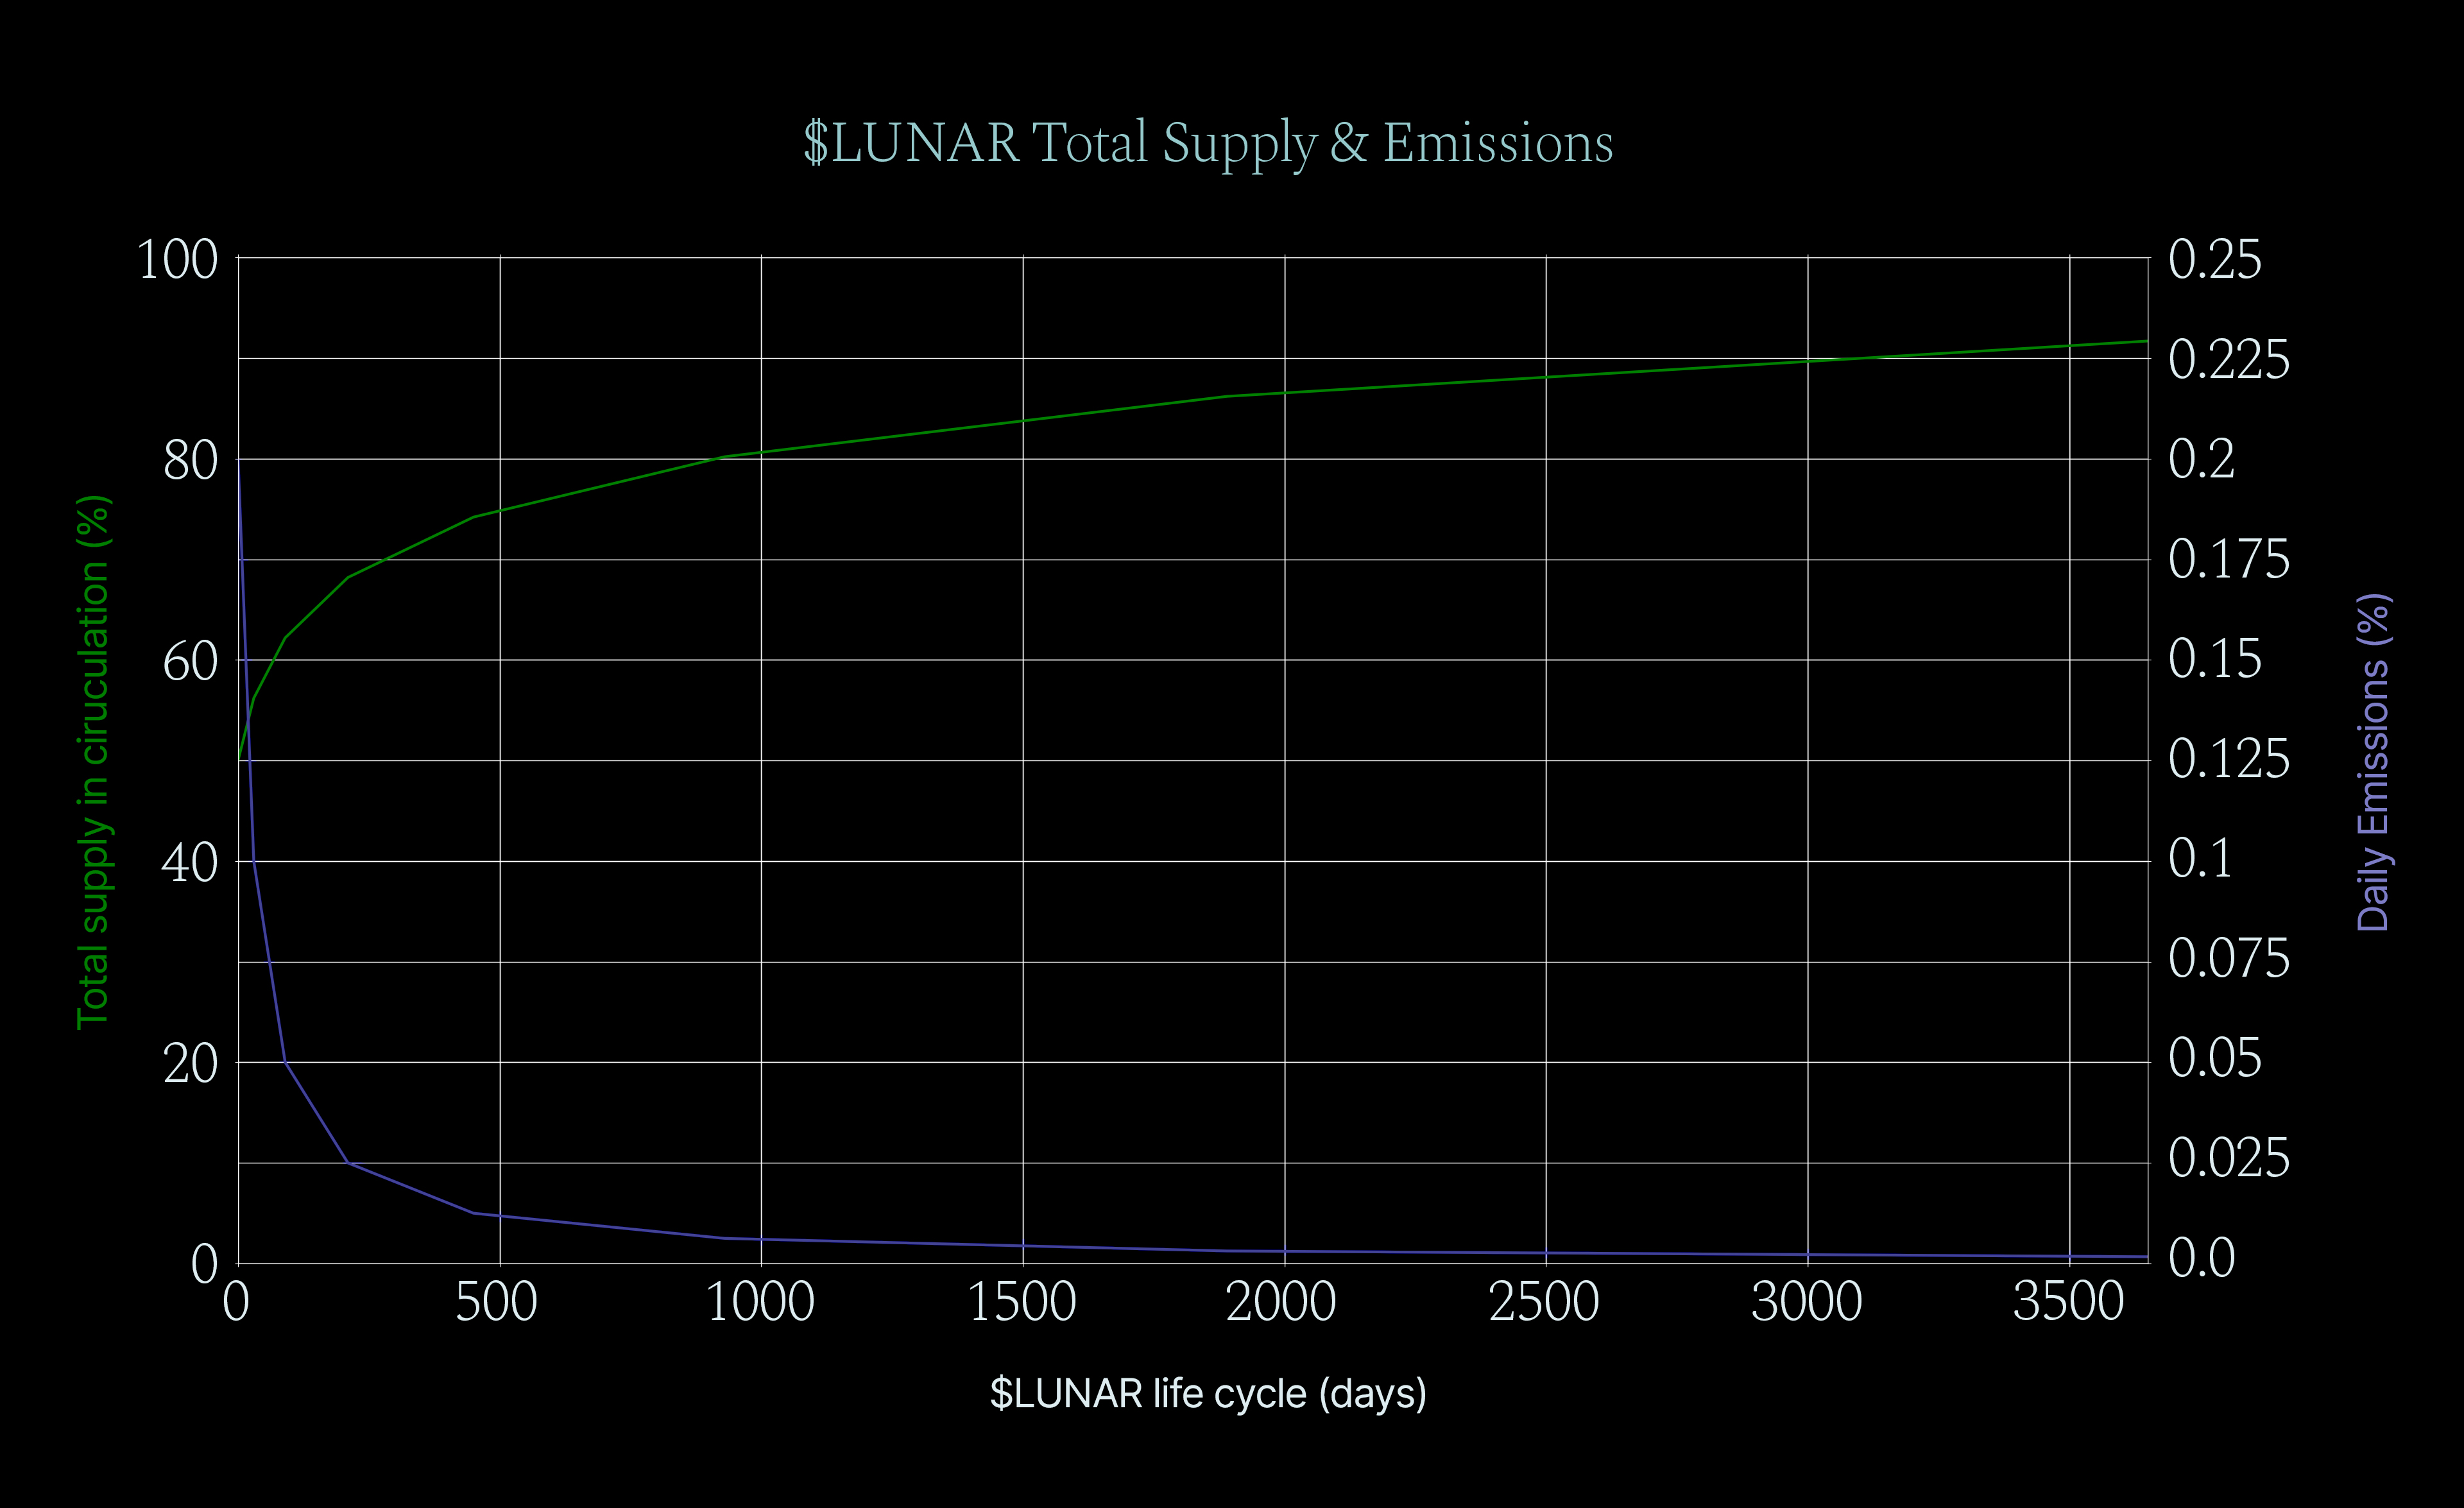 $LUNAR Life Cycle - Supply & Emissions, 10 years